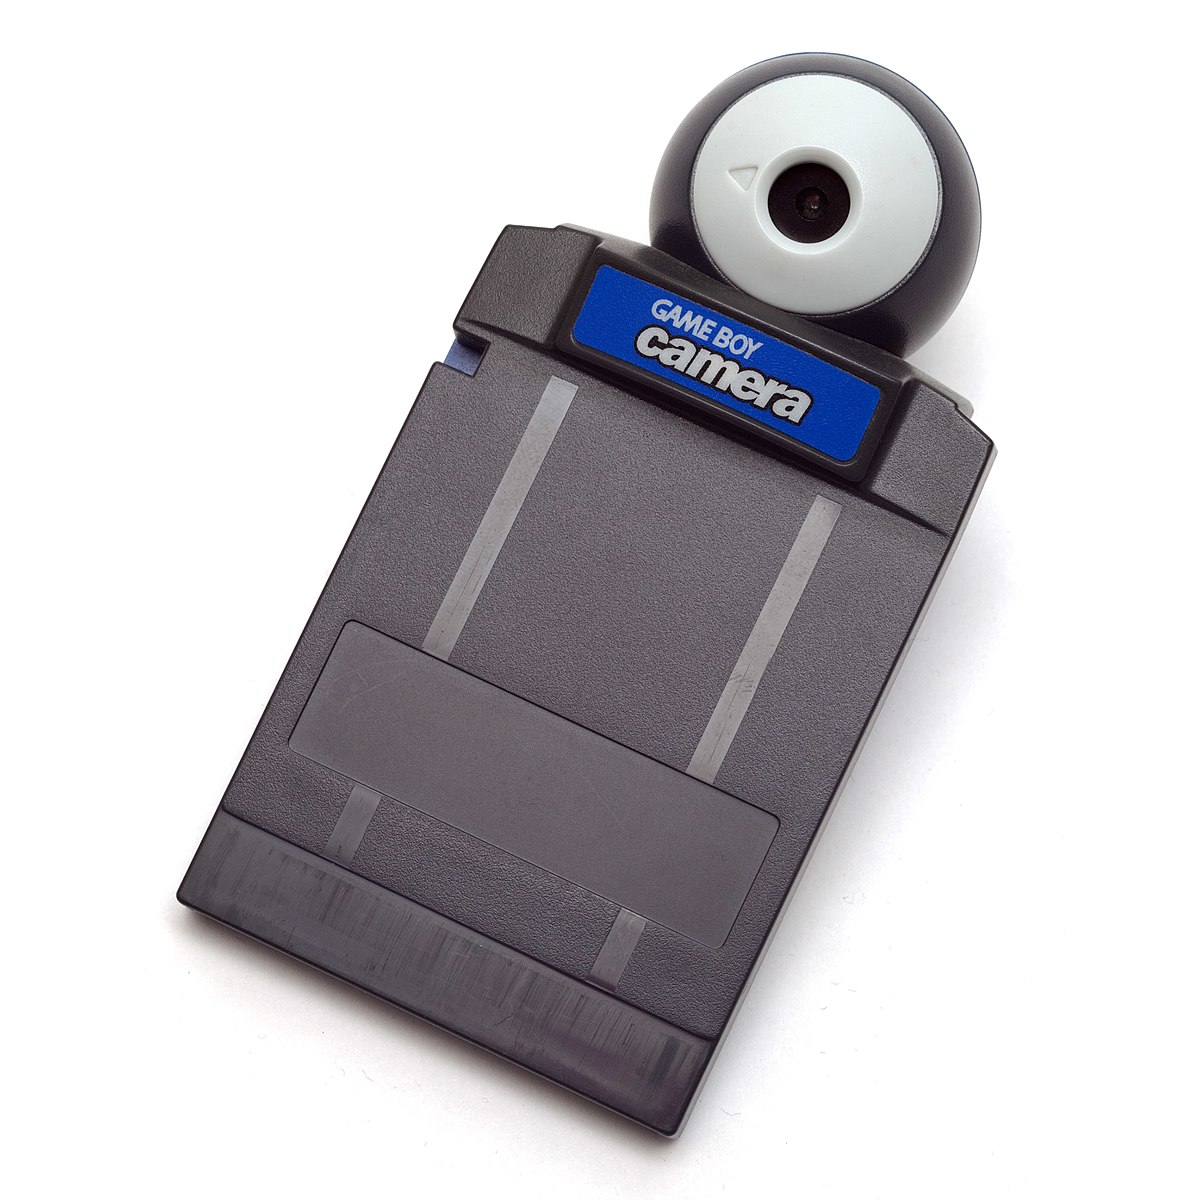 A blue gameboy camera cartridge, it is a small rectangular box of plastic with a spherical enclosure on one side that houses a camera.